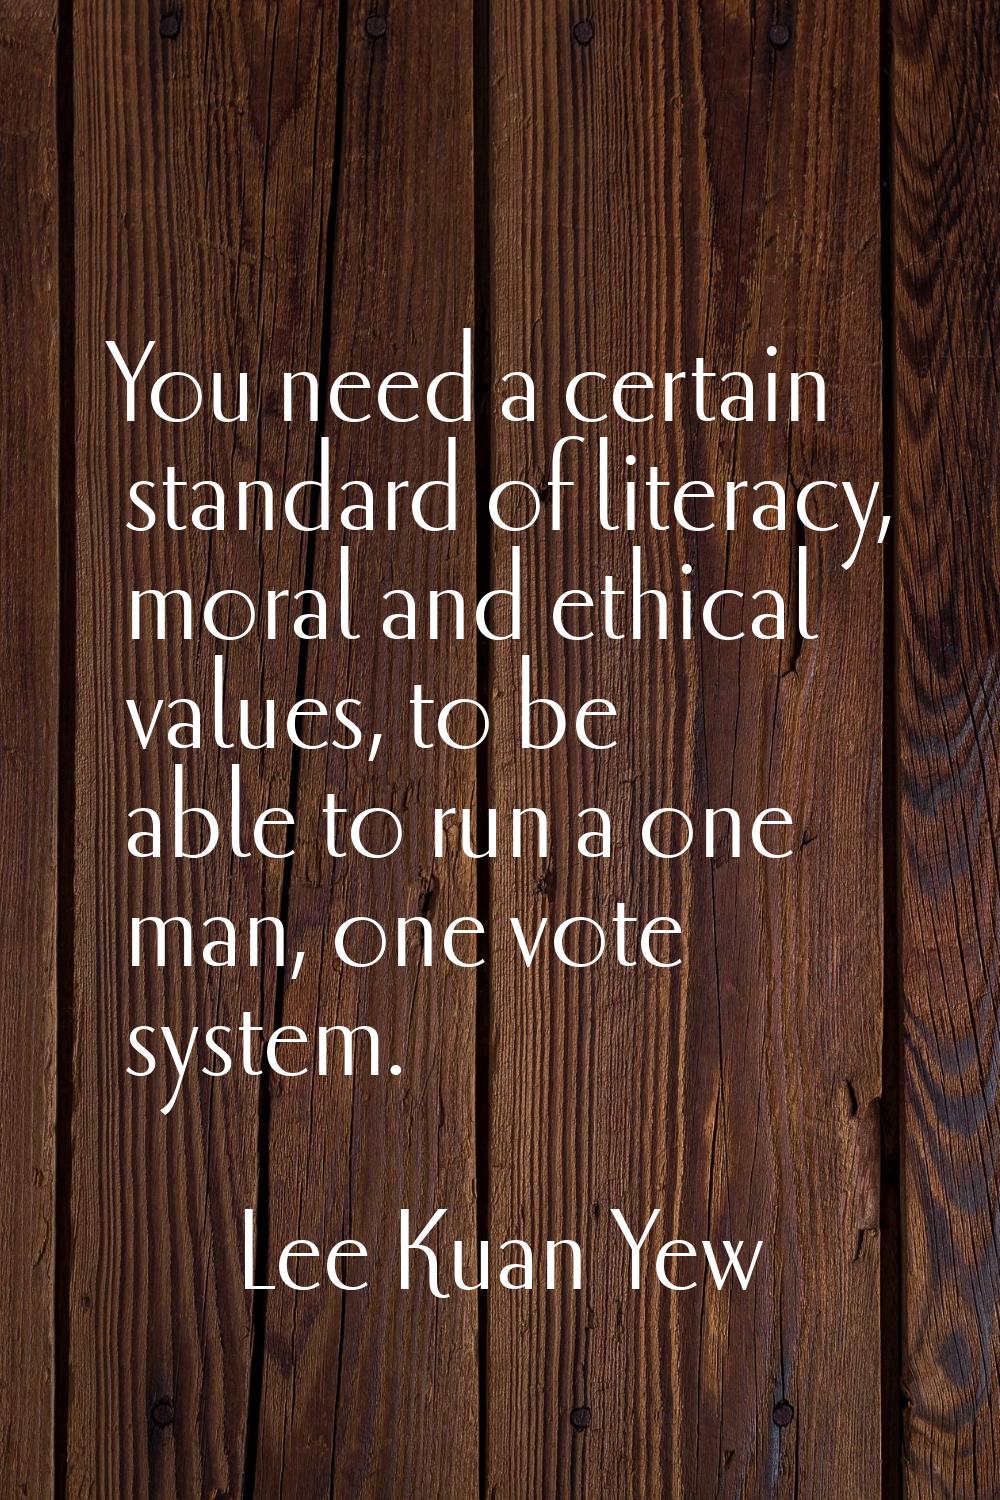 You need a certain standard of literacy, moral and ethical values, to be able to run a one man, one